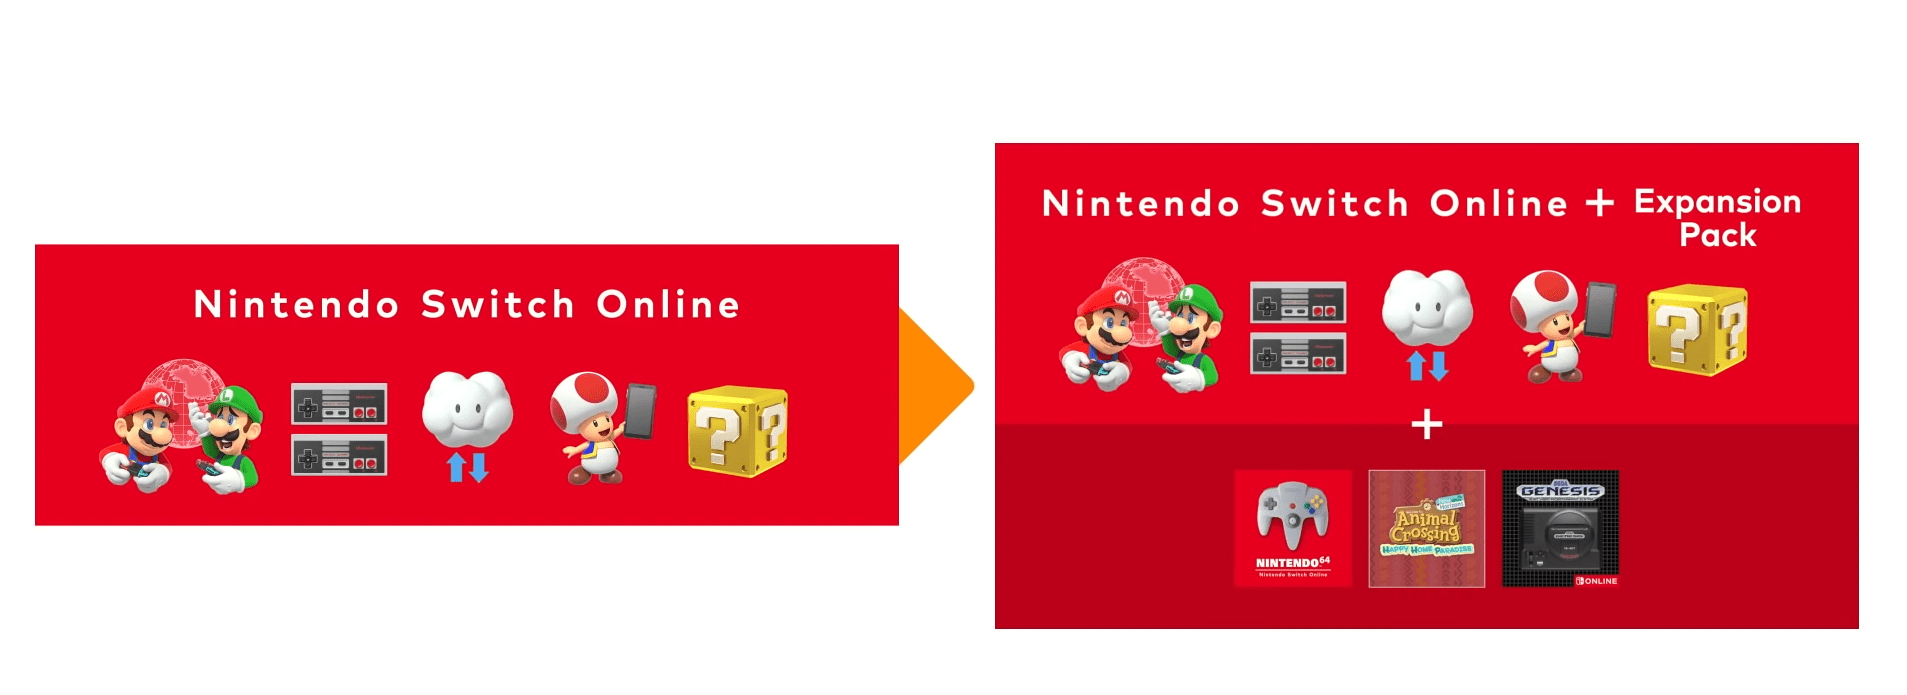 does the nes pack come with the switch membership